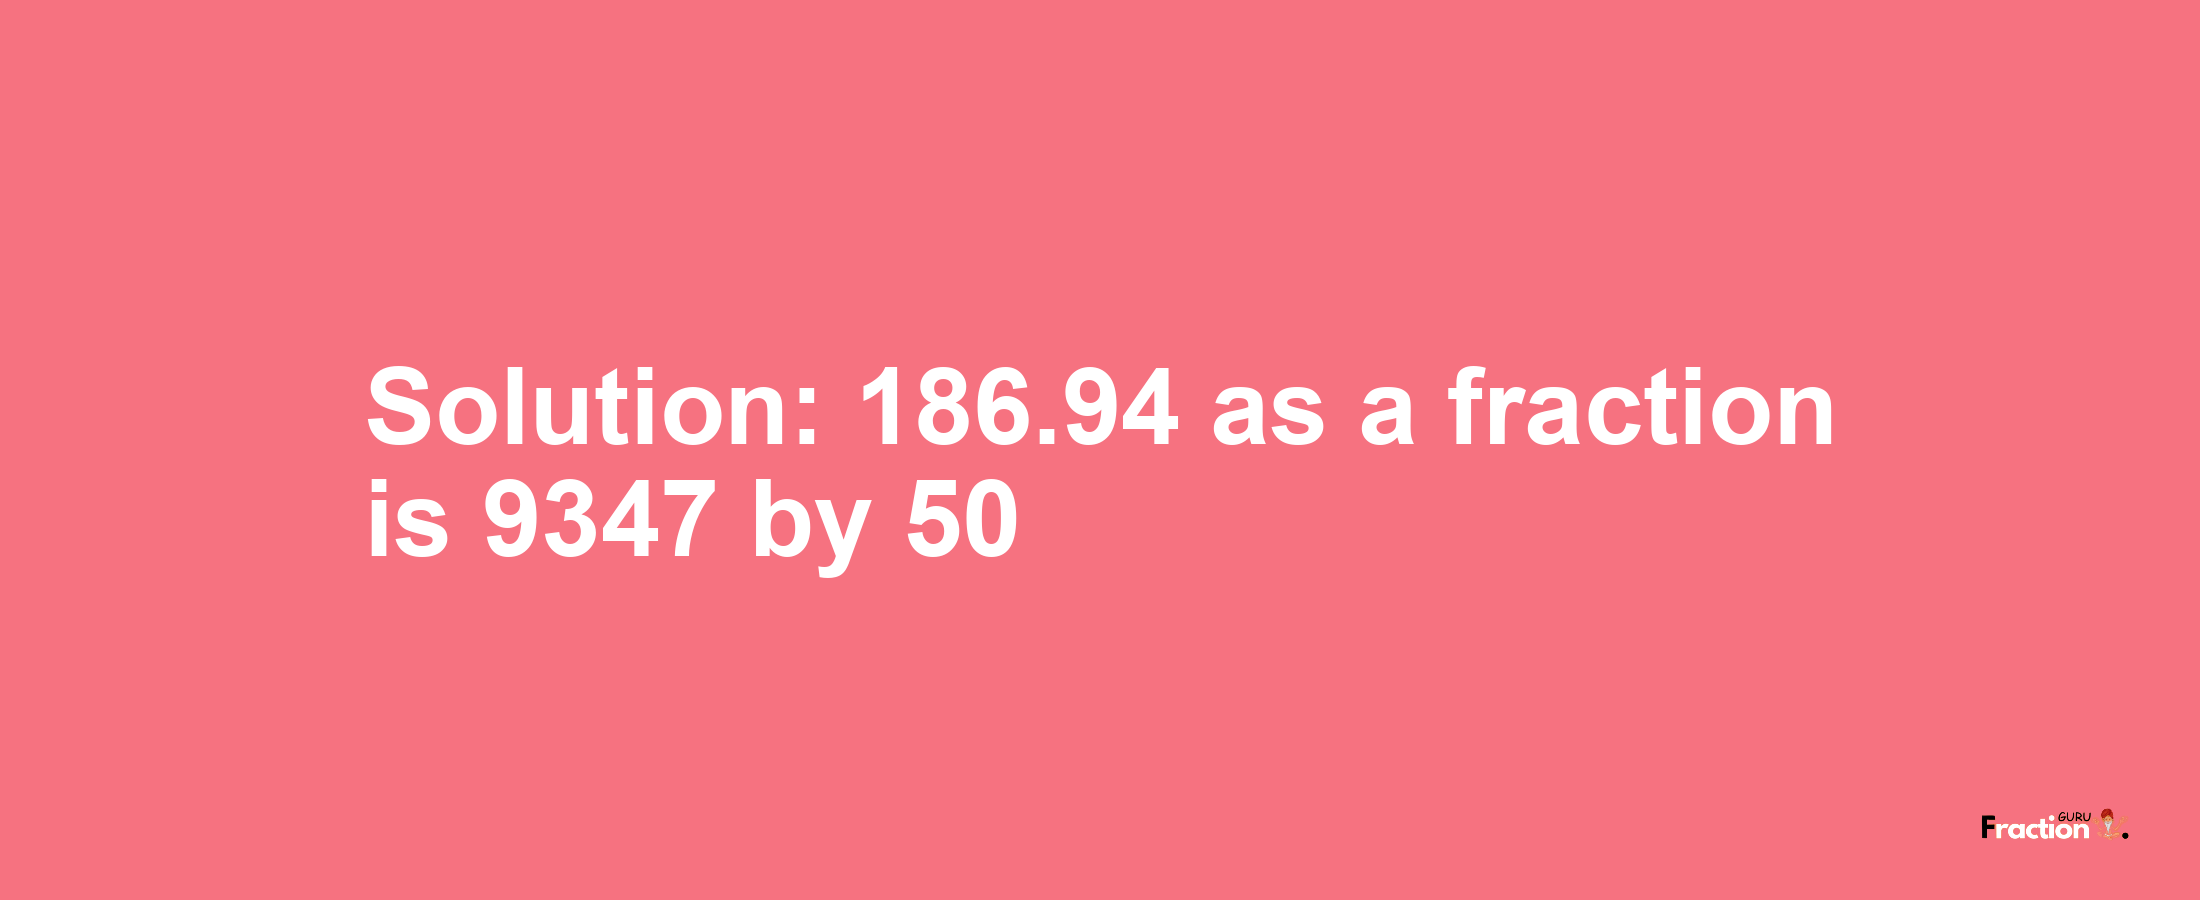 Solution:186.94 as a fraction is 9347/50